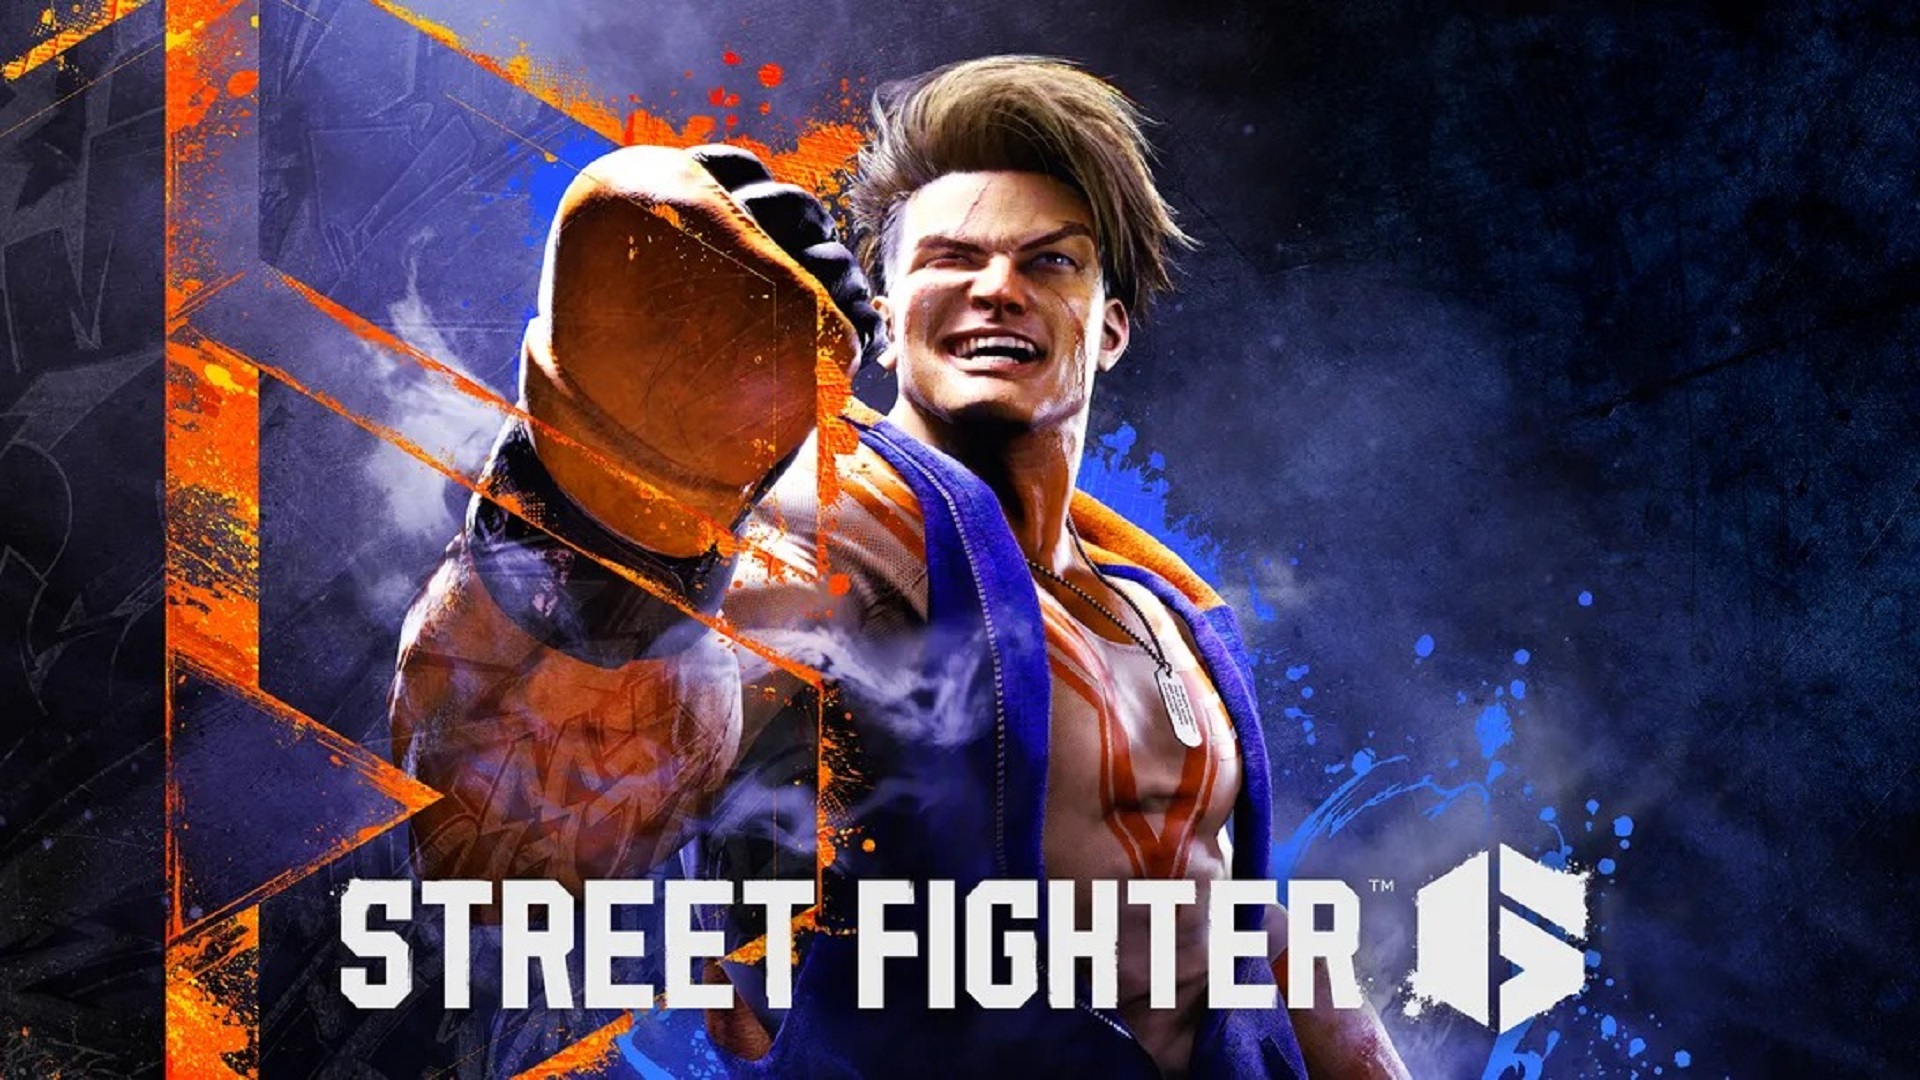 STREET FIGHTER RVN6ACK CAMPAIGN - Run it back in SF6! - Outline